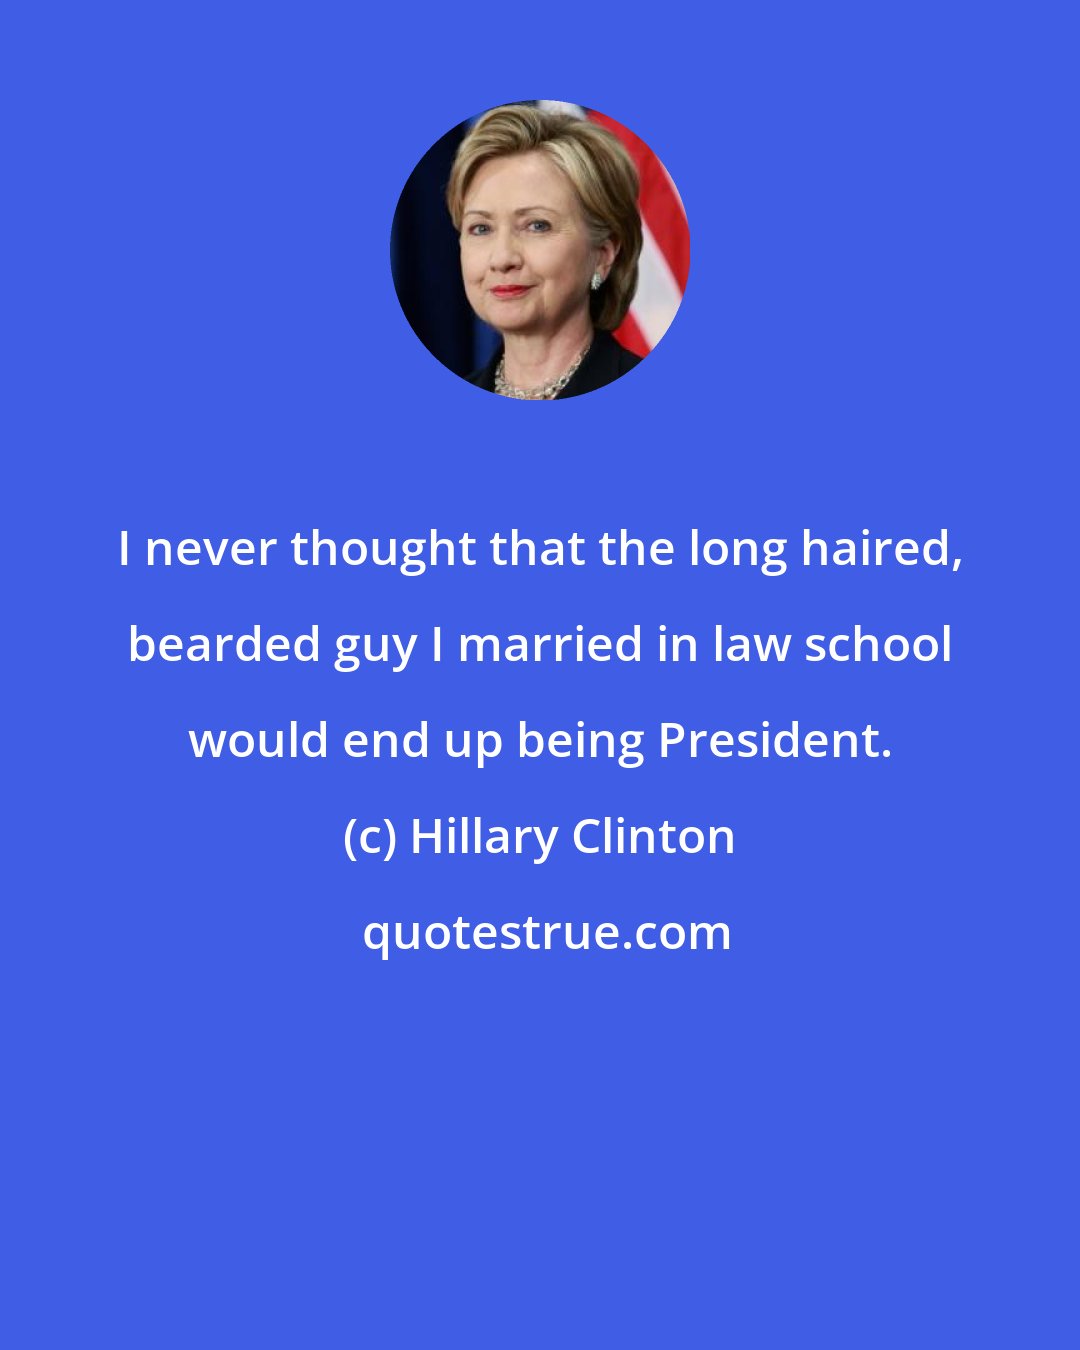 Hillary Clinton: I never thought that the long haired, bearded guy I married in law school would end up being President.